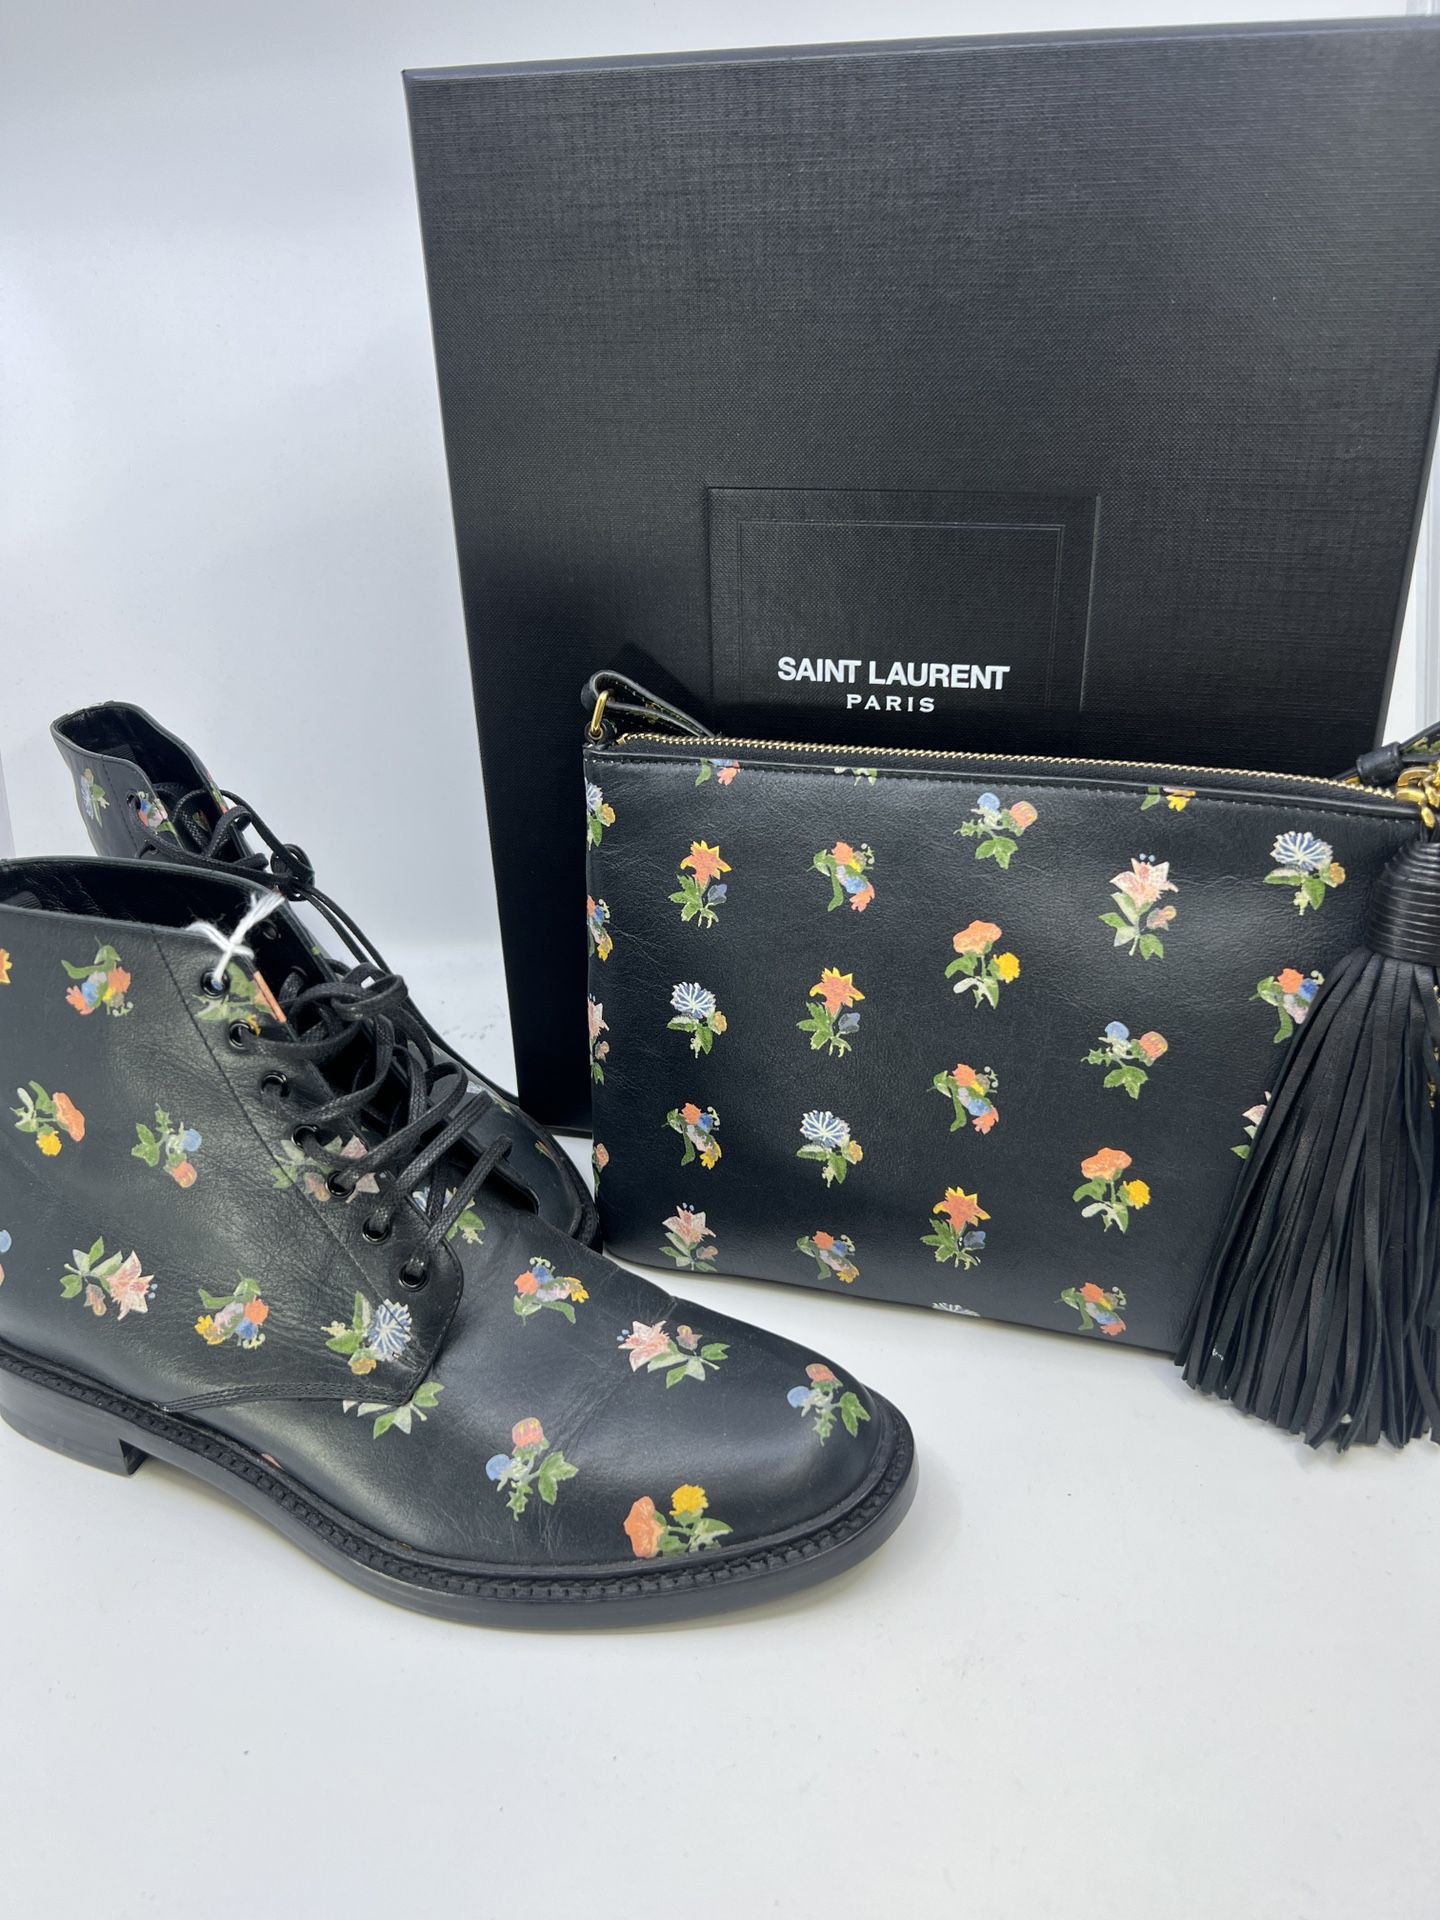 Saint Laurent Leather Boots(5.5) and Bag